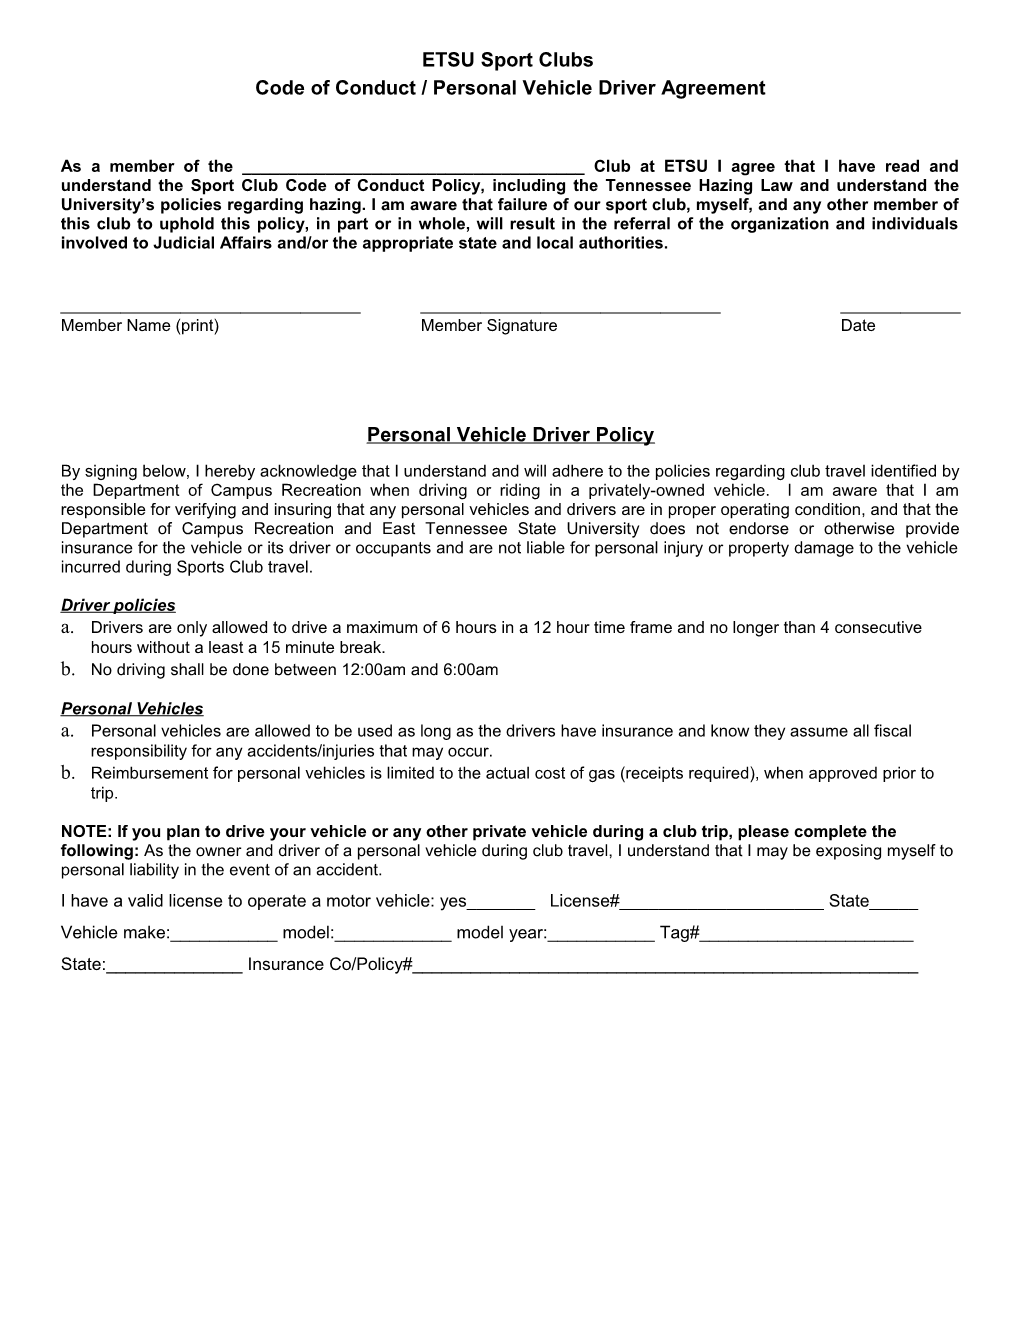 Code of Conduct / Personal Vehicle Driver Agreement